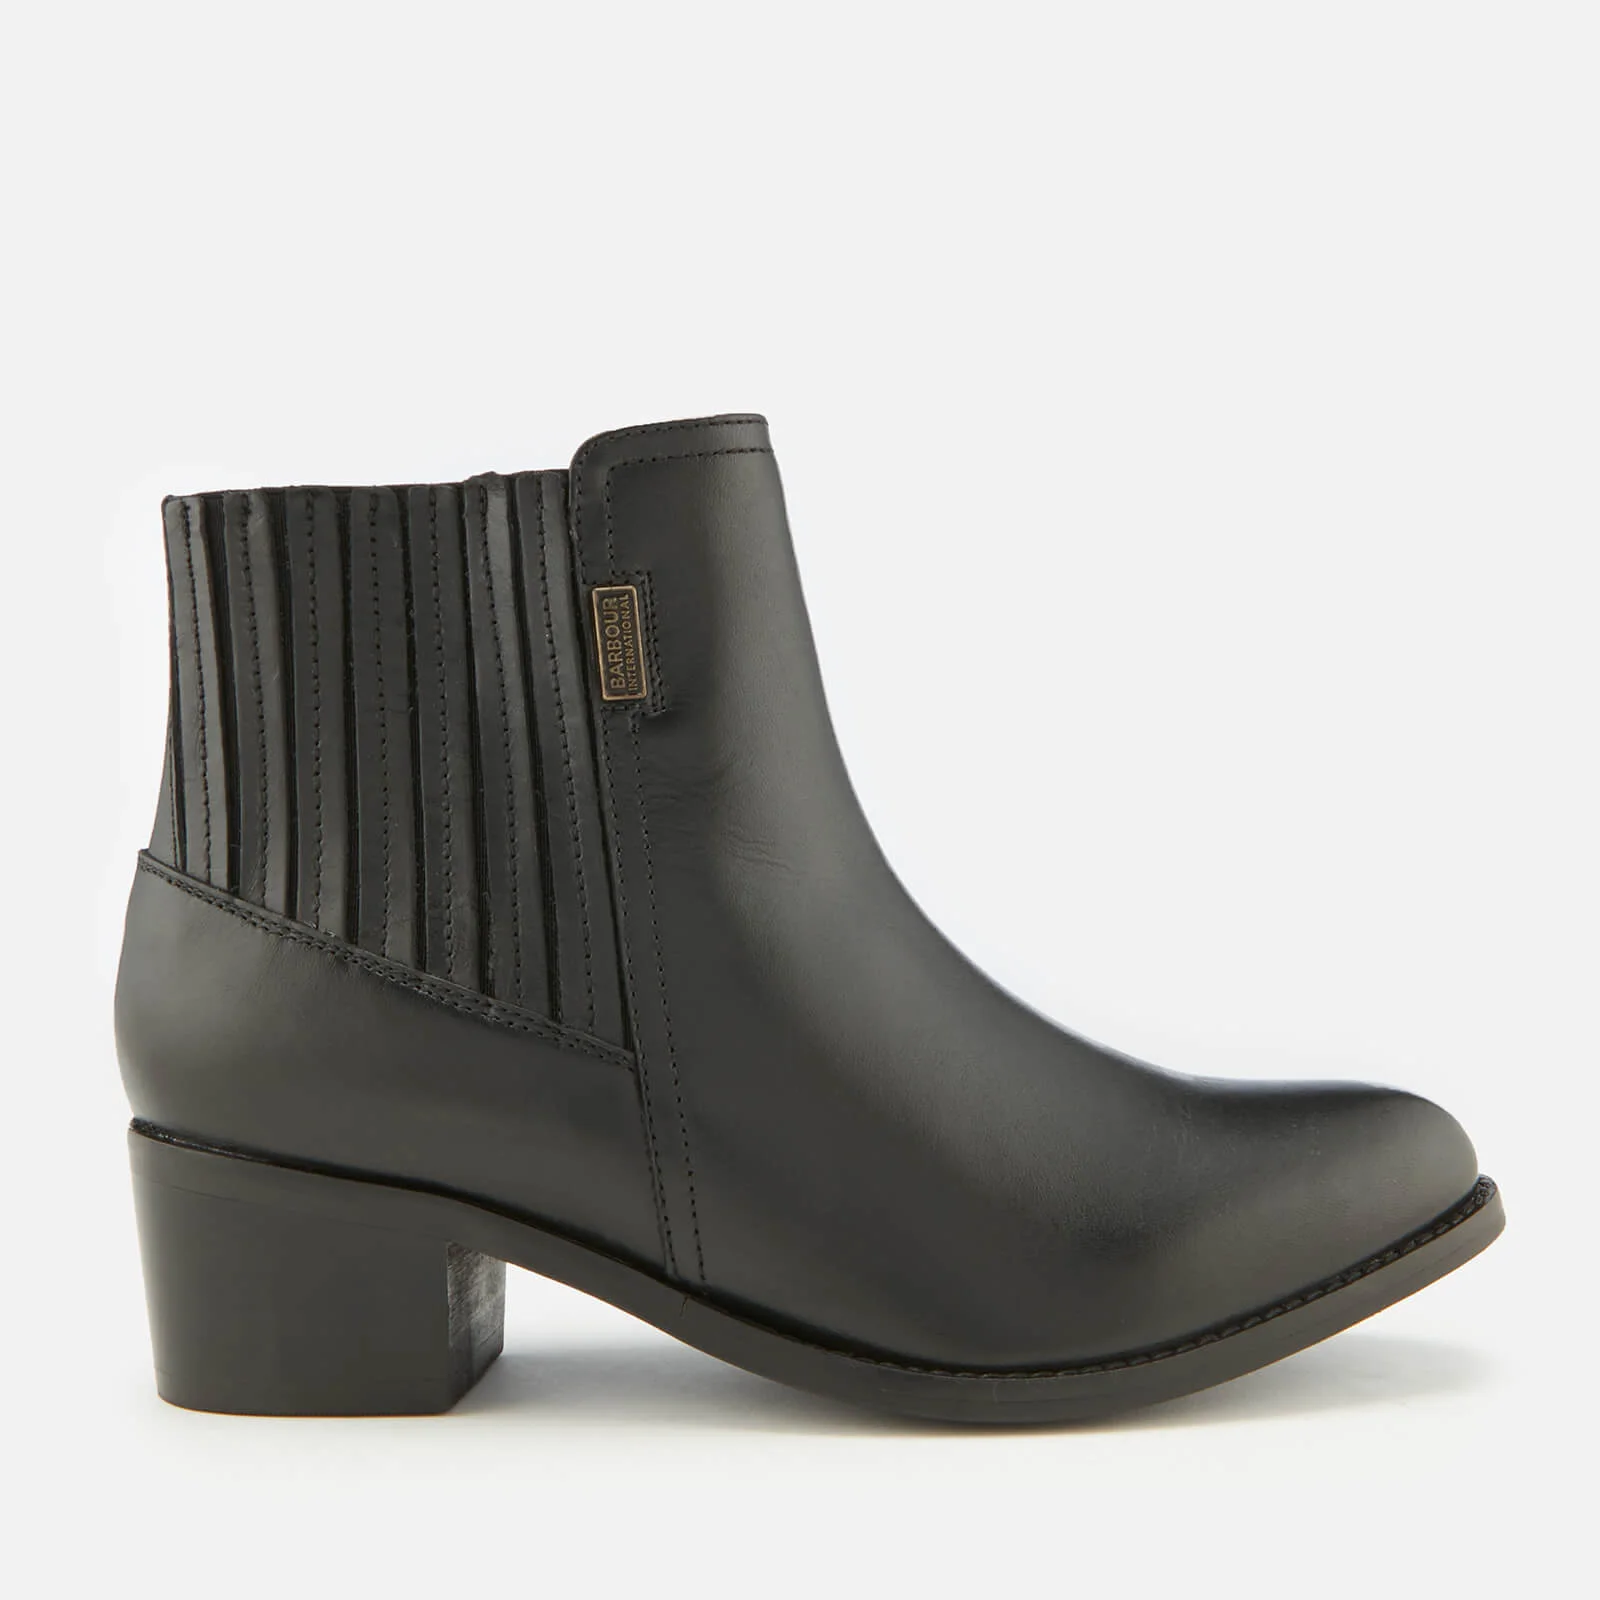 Barbour International Women's Compton Leather Heeled Chelsea Boots - Black Image 1